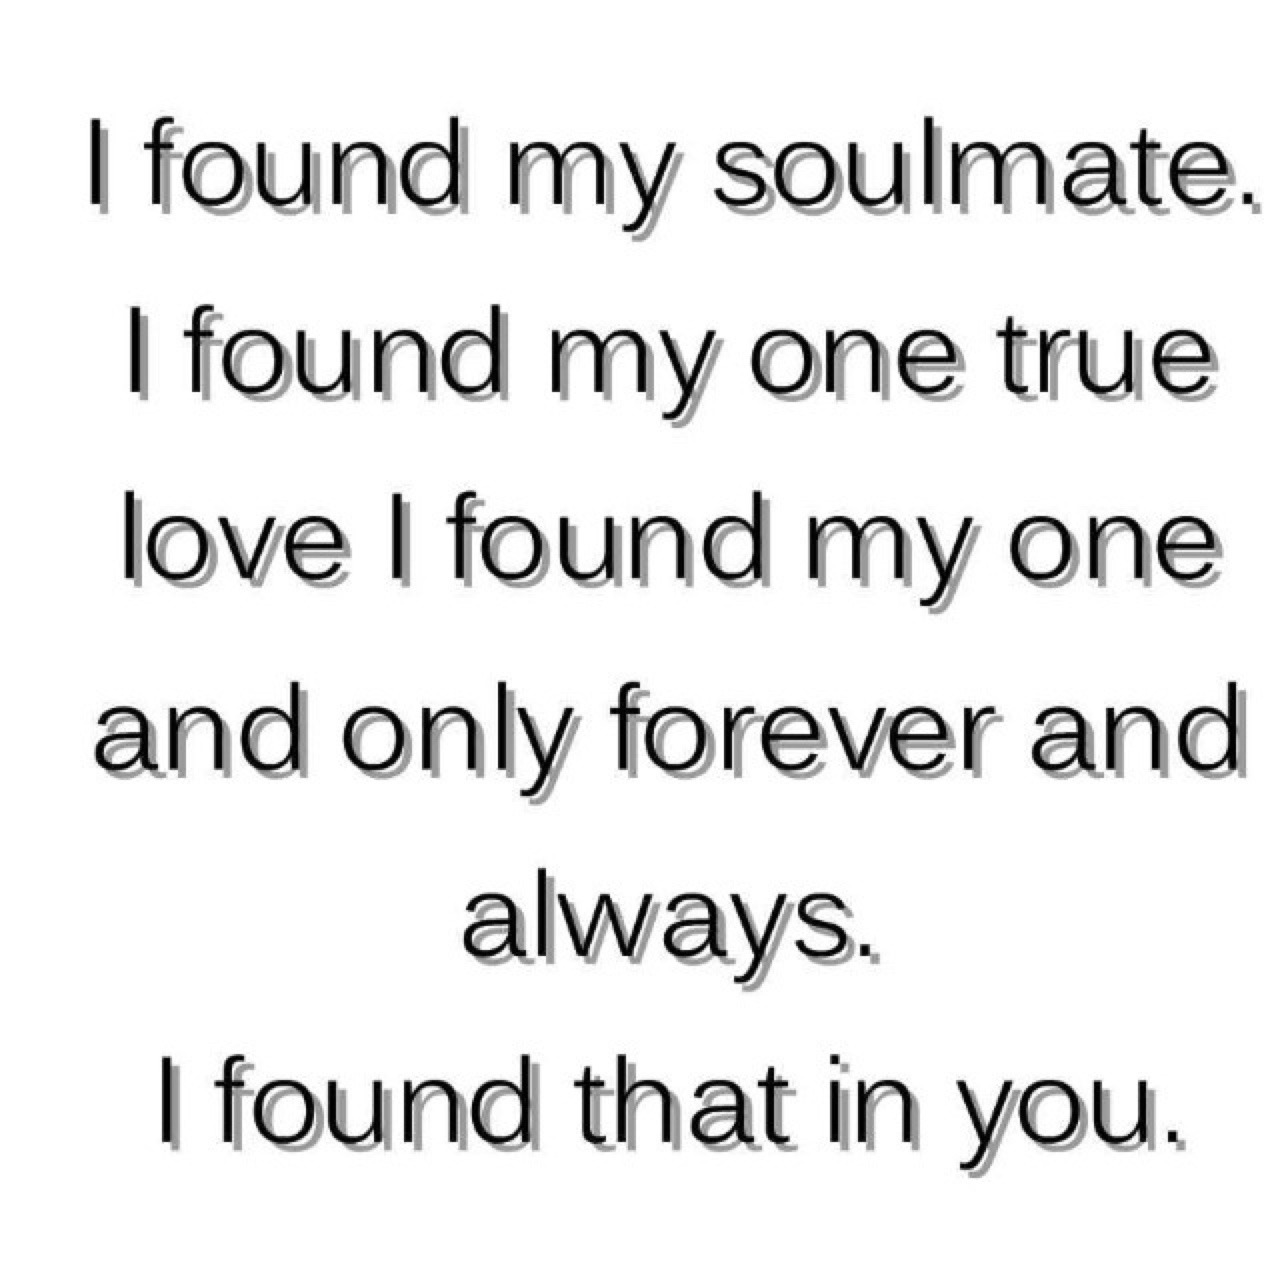 my true love forever soulmate true love relationship relationship quotes long distant relationship i love her i love you i love you so much love love quotes